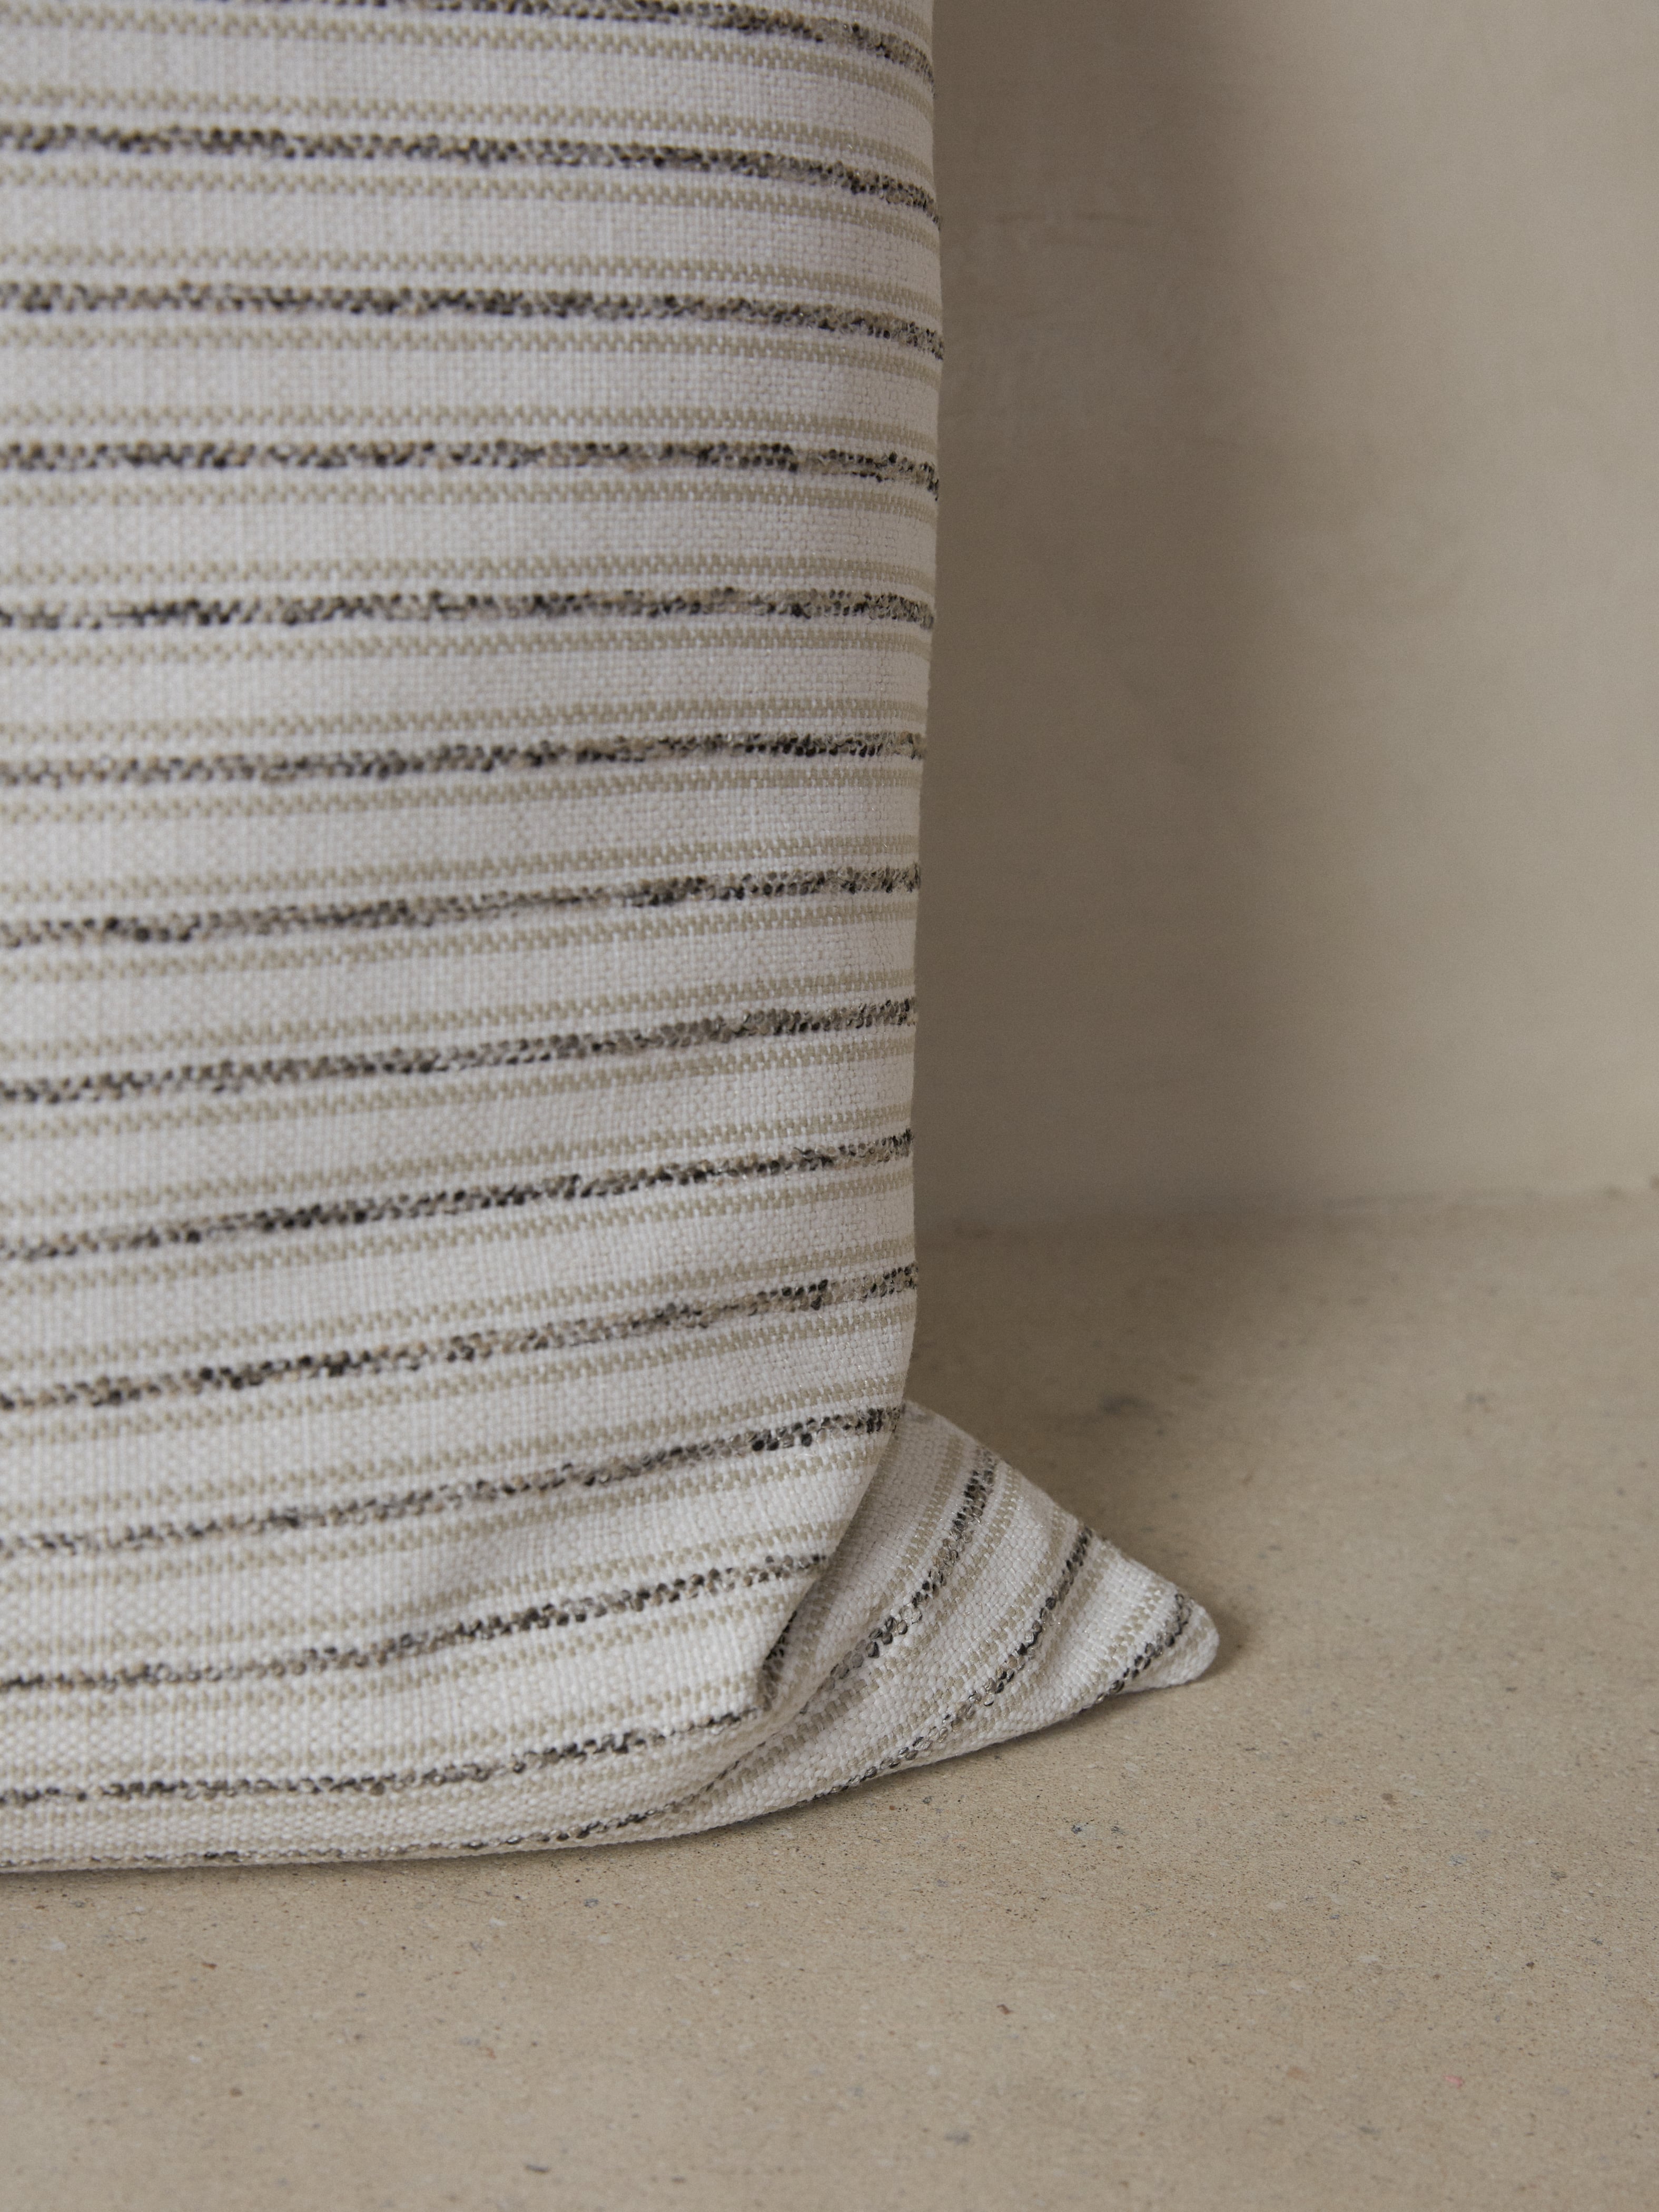 Fabric details on the striped Cambridge Pillow in Black, white and tan.